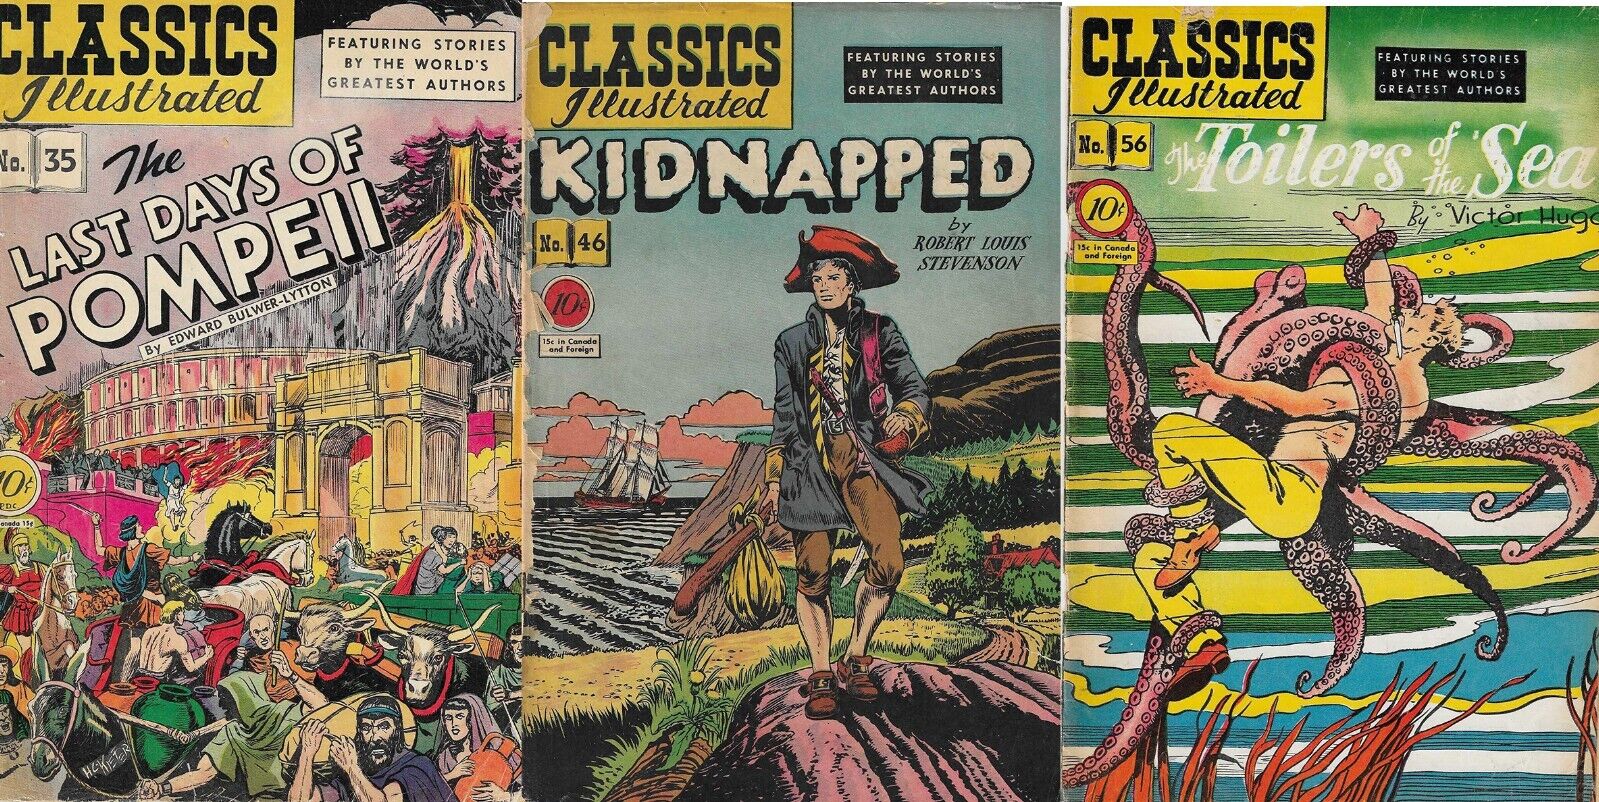 Classics Illustrated - 1st editions - lot of 3 - #35 46 56  FREE S/H  Overst $80